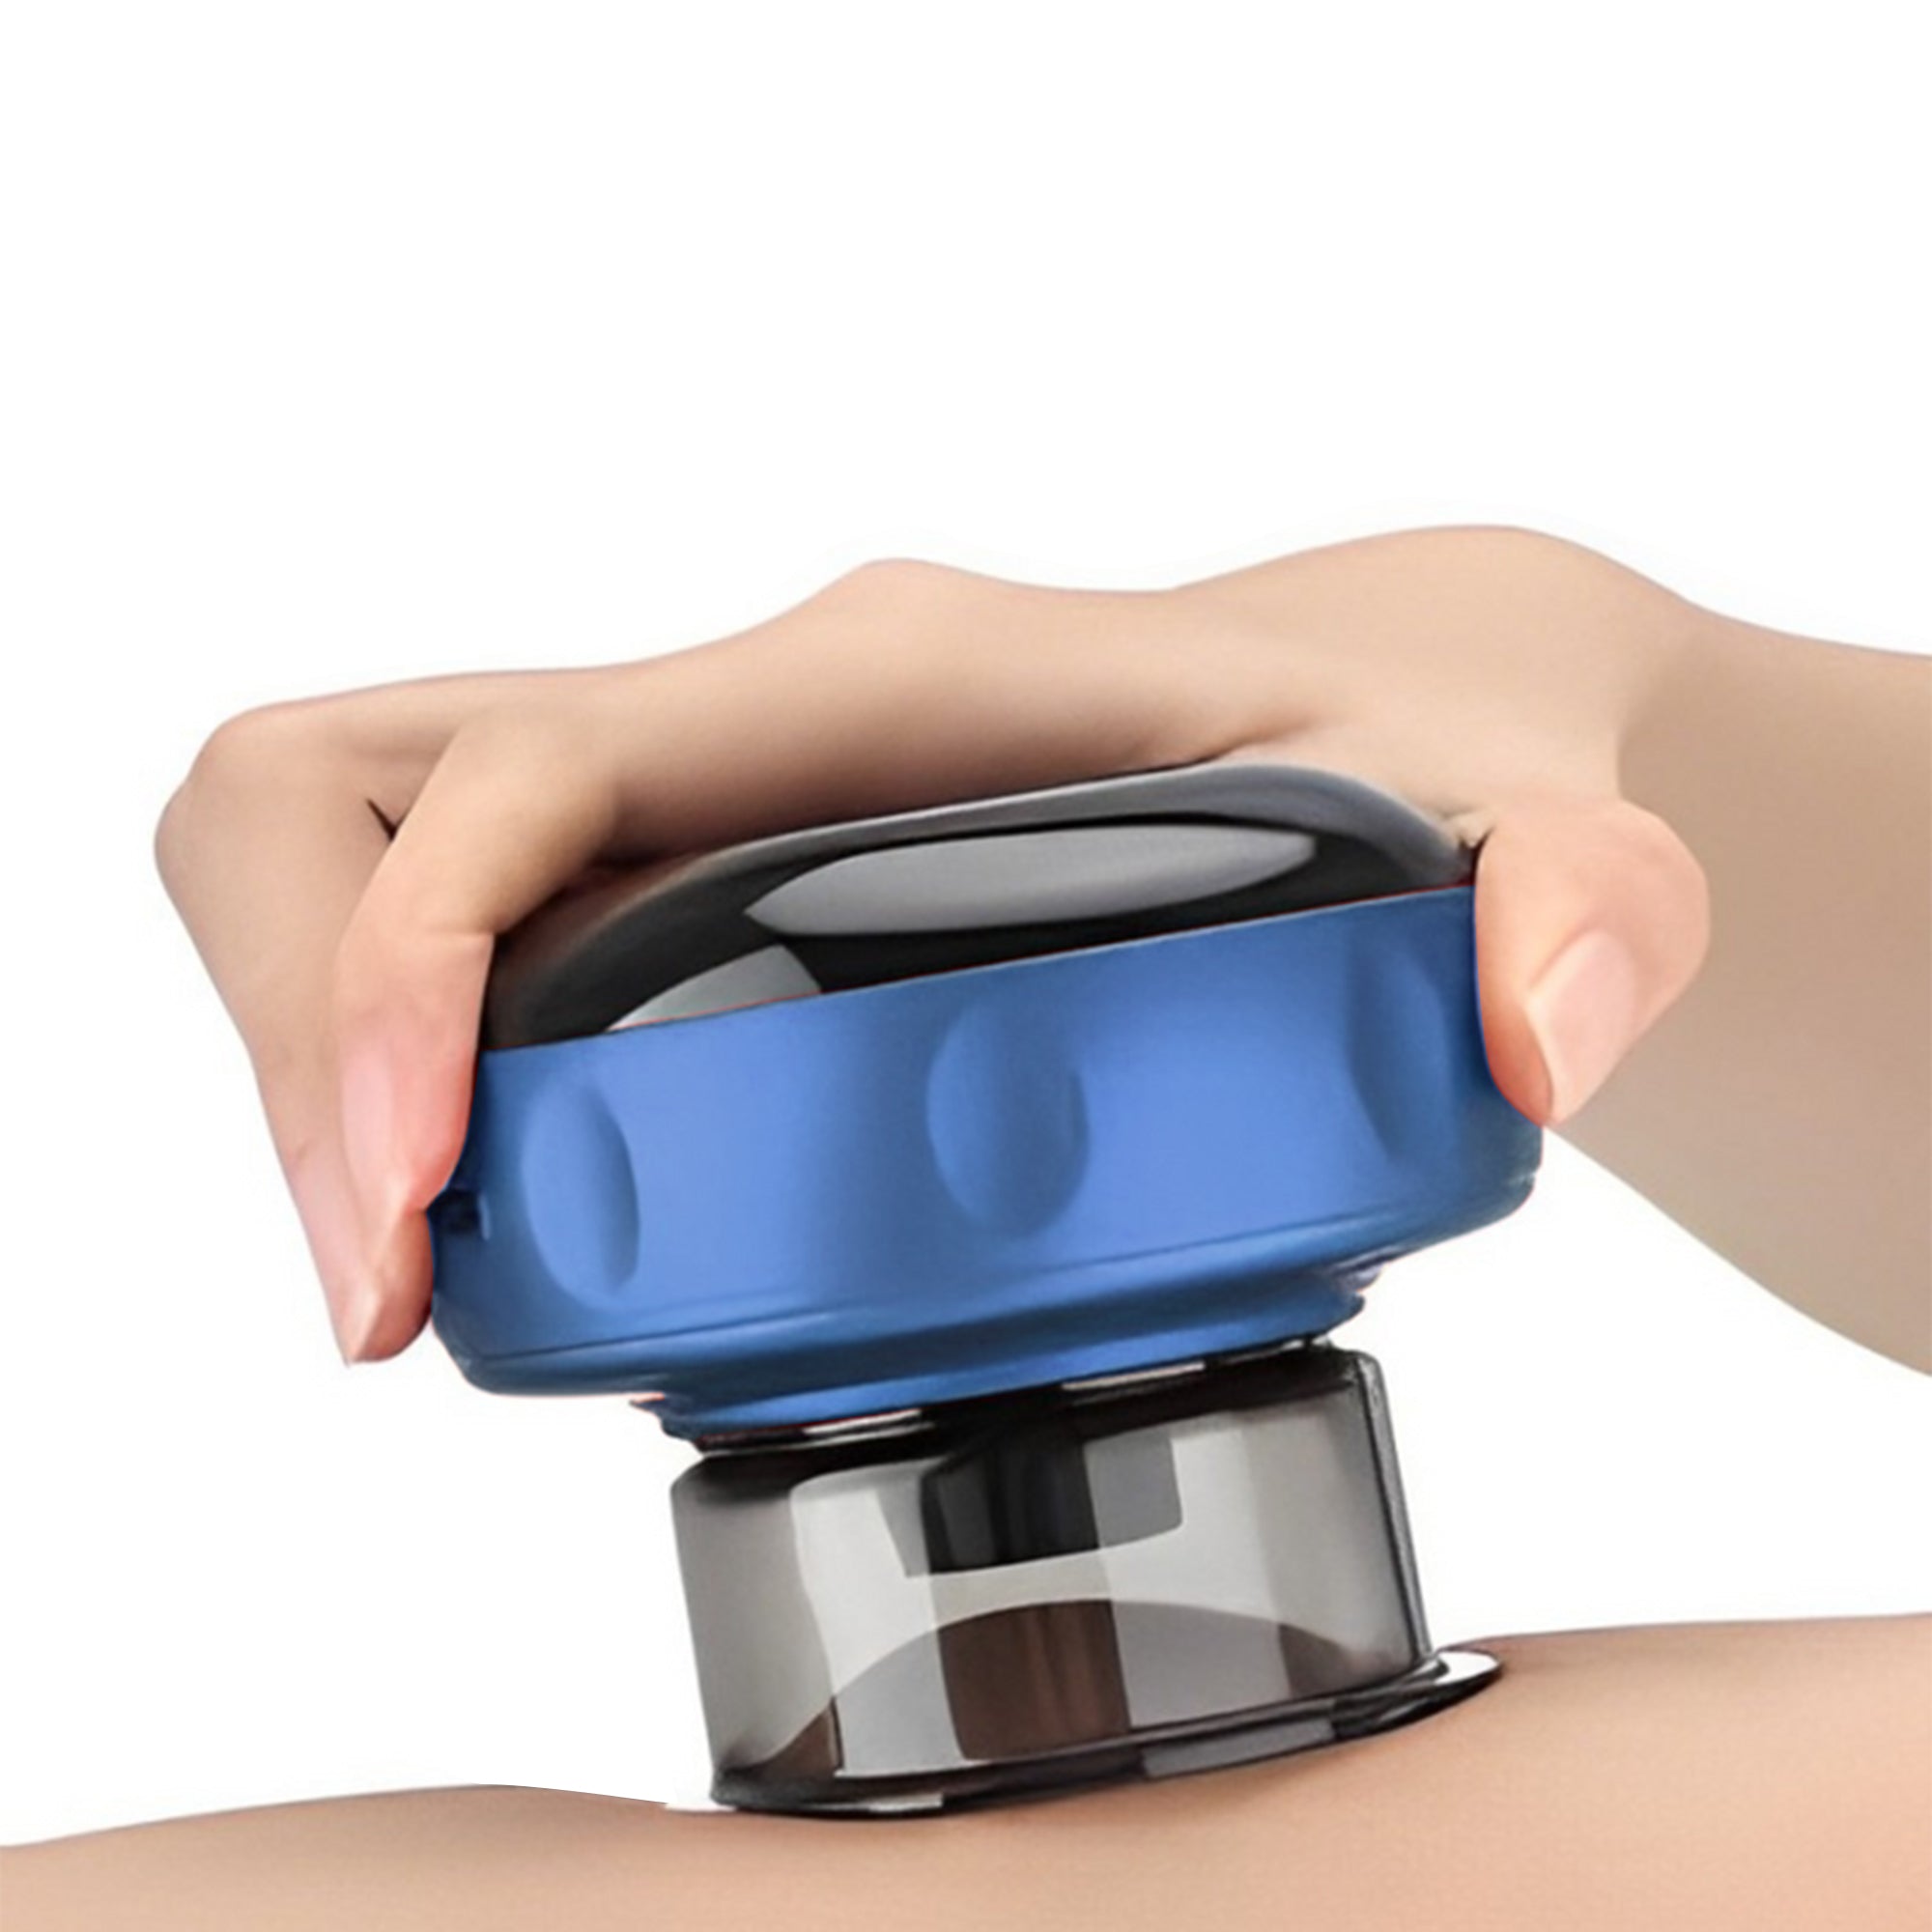 The Smart Cupper: Spa at Home